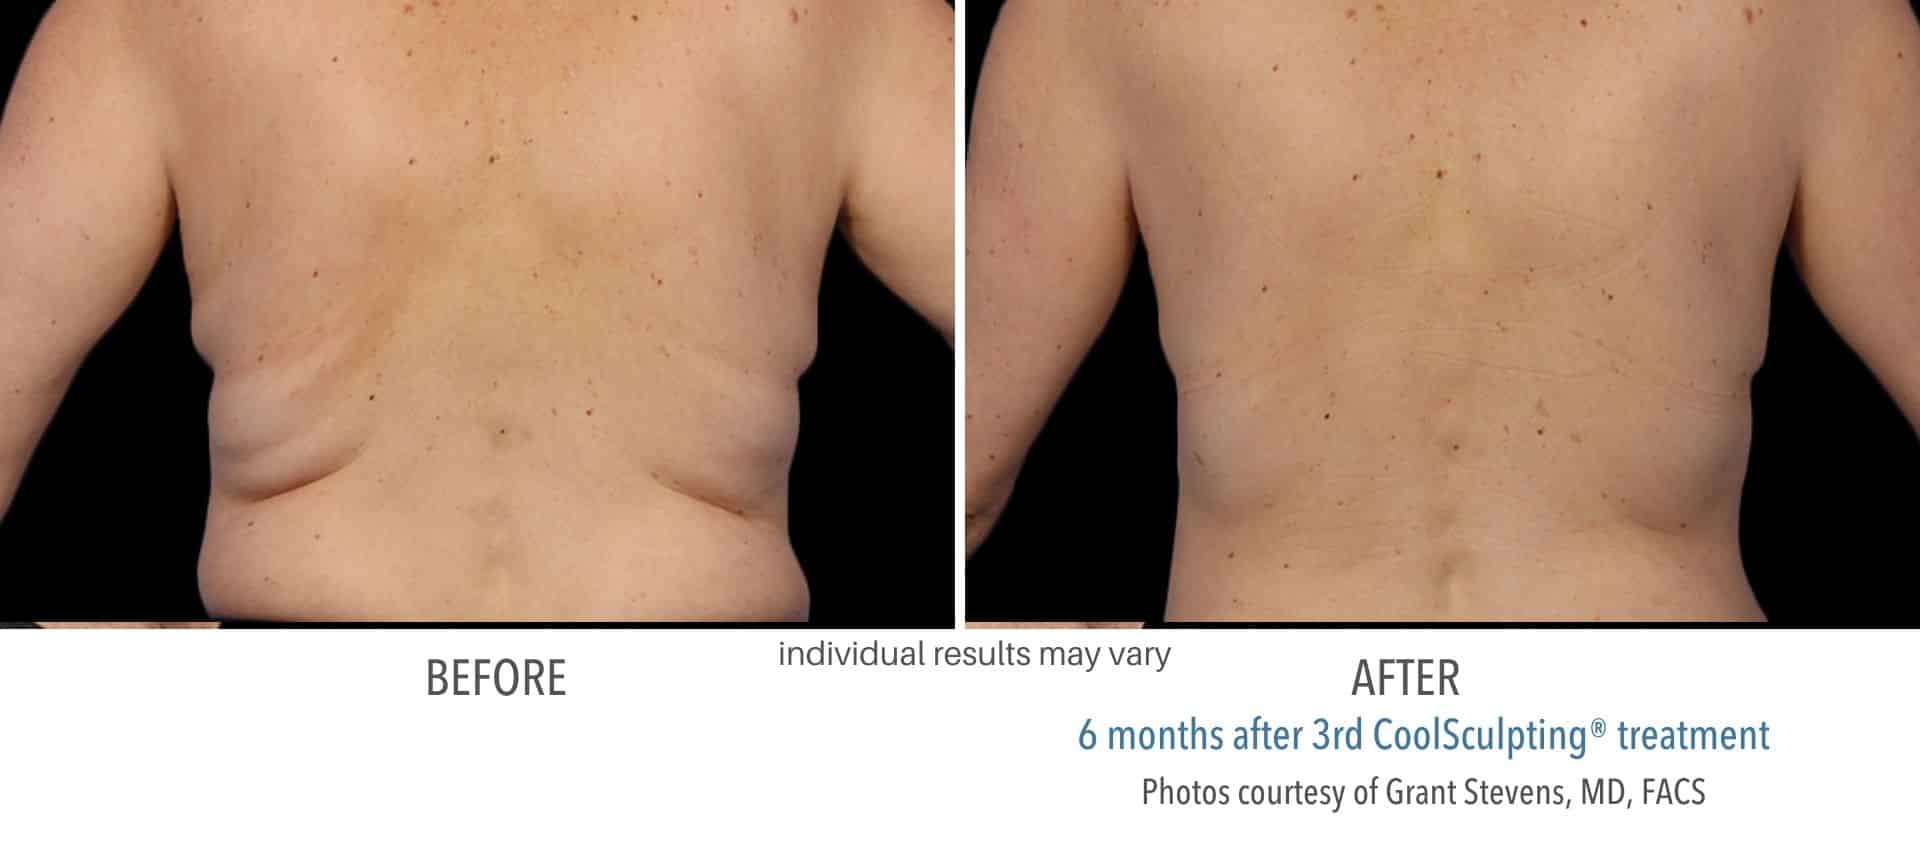 Coolsculpting Miami Before And After Images